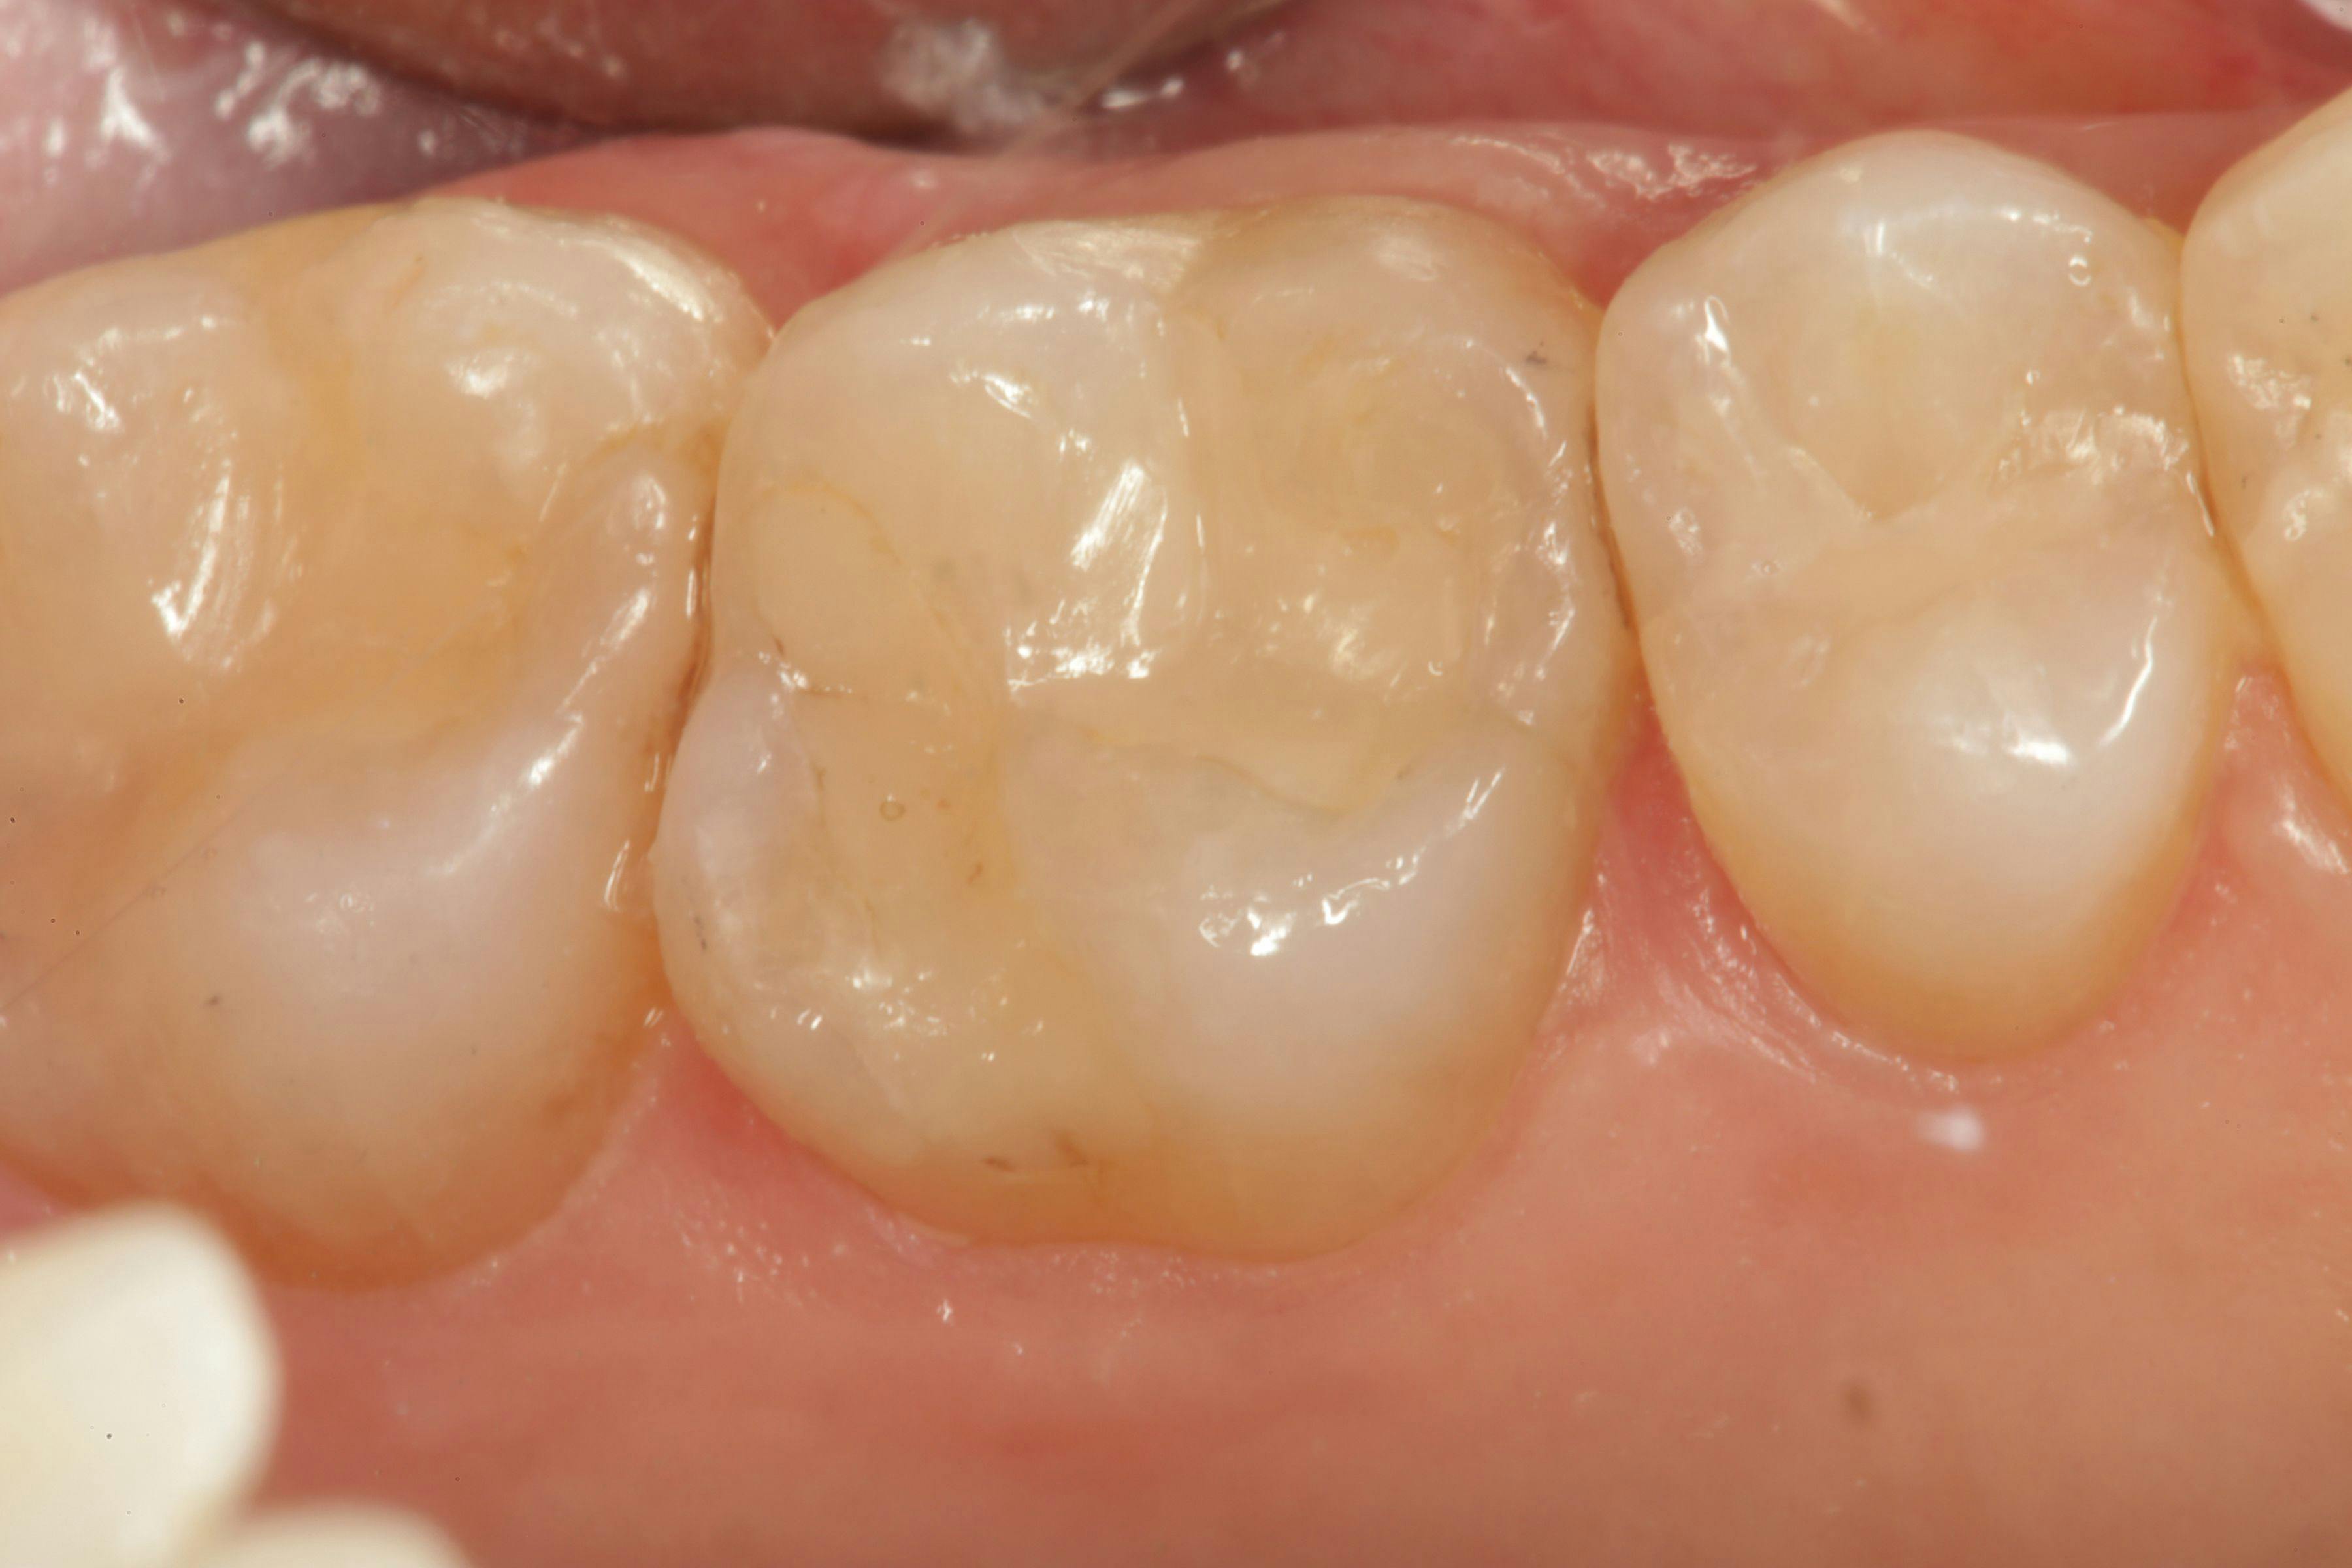 Occlusal view of the completed restoration after placing Activa Presto as the enamel layer. 